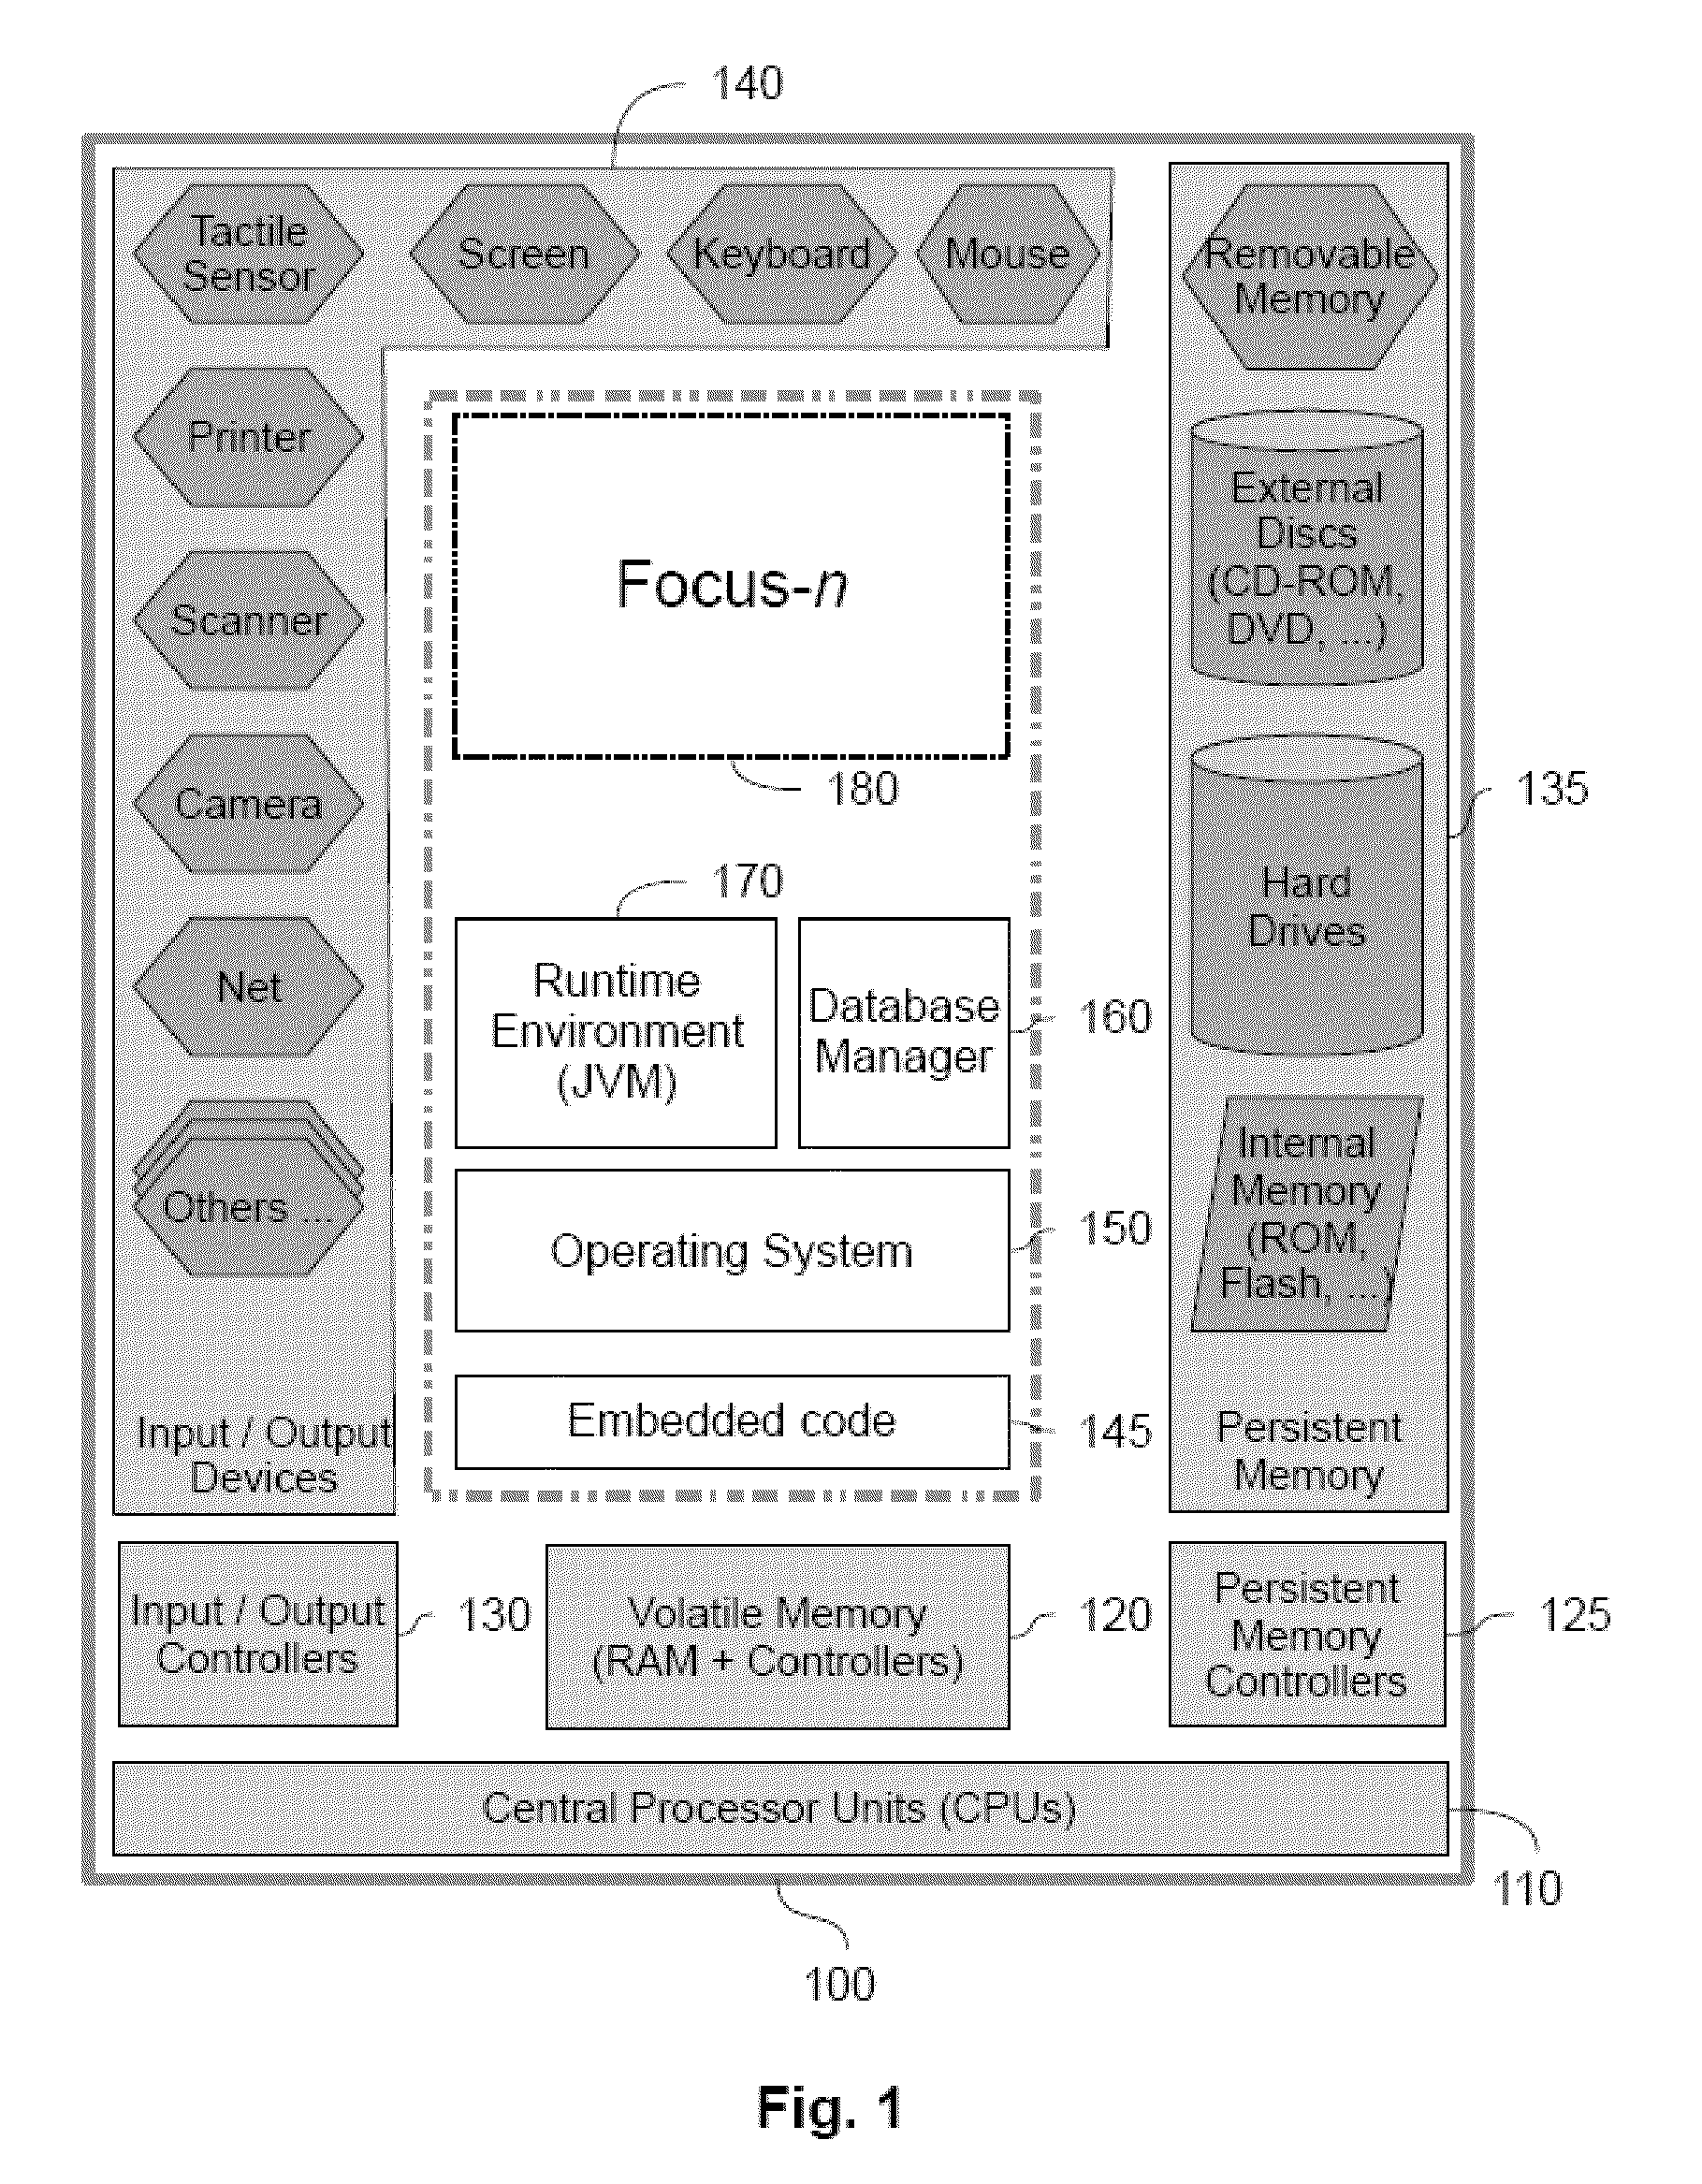 System and method for integral management of information for end users